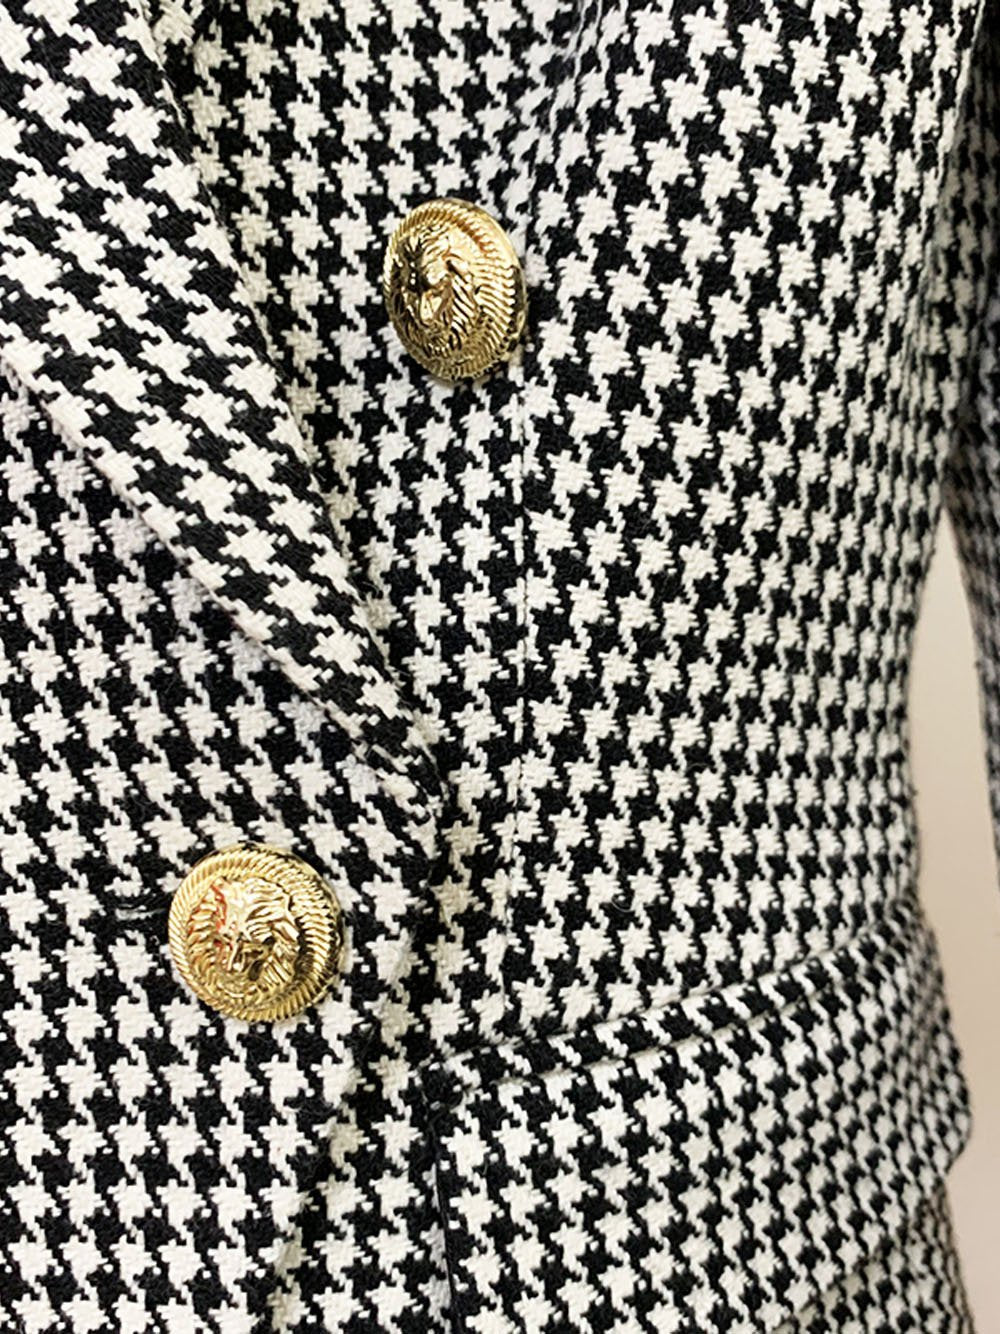 Double Breasted Tweed Houndstooth Blazer